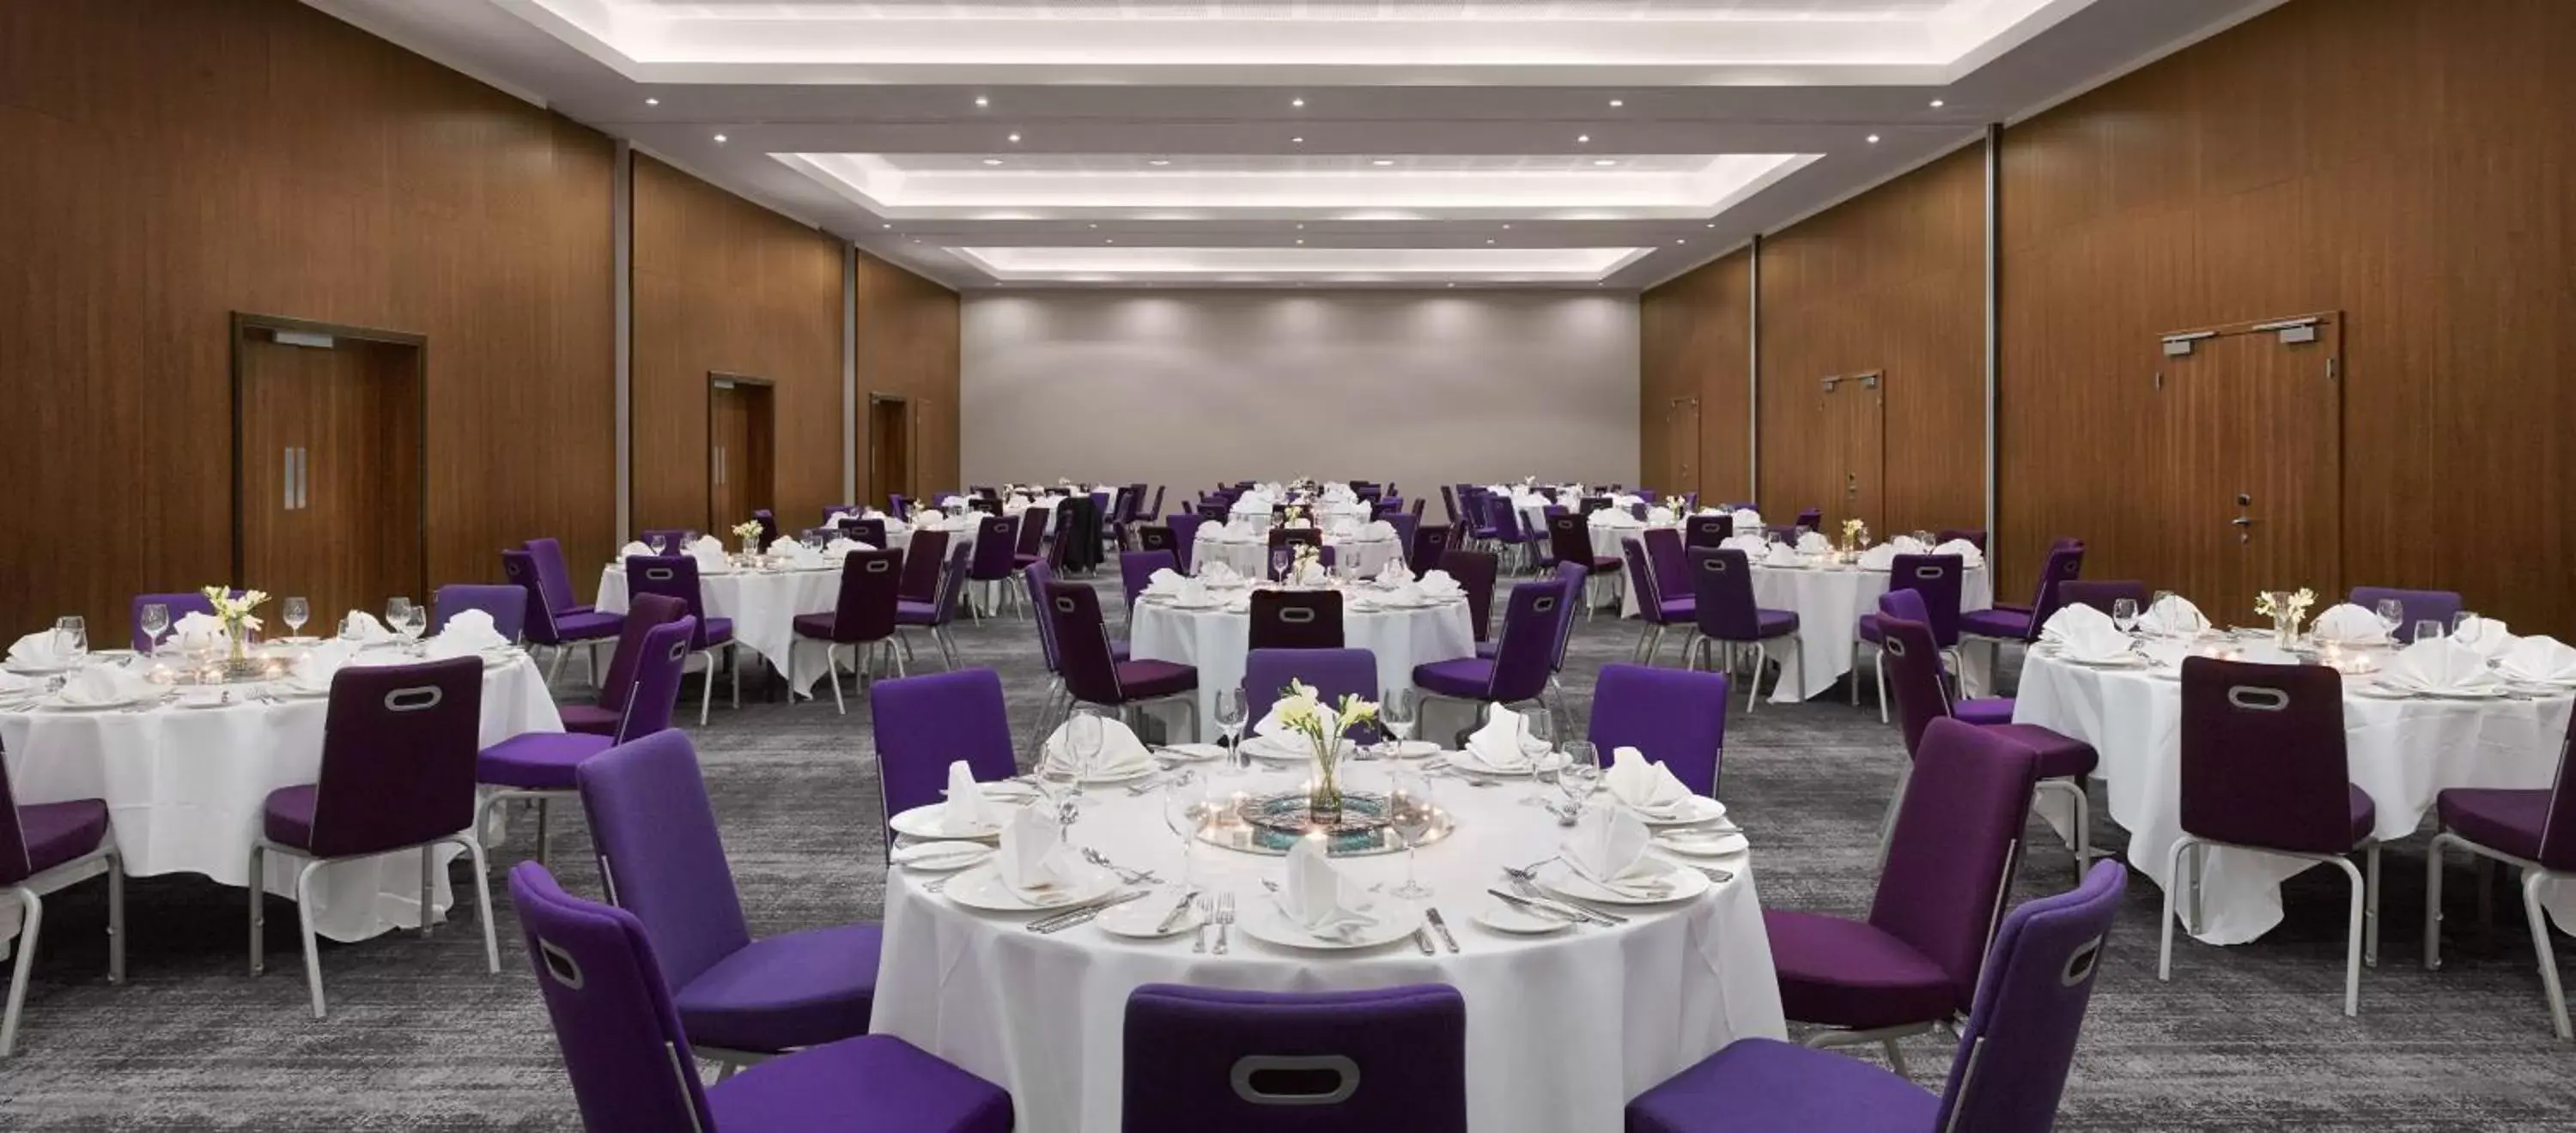 On site, Banquet Facilities in Radisson Blu Hotel East Midlands Airport